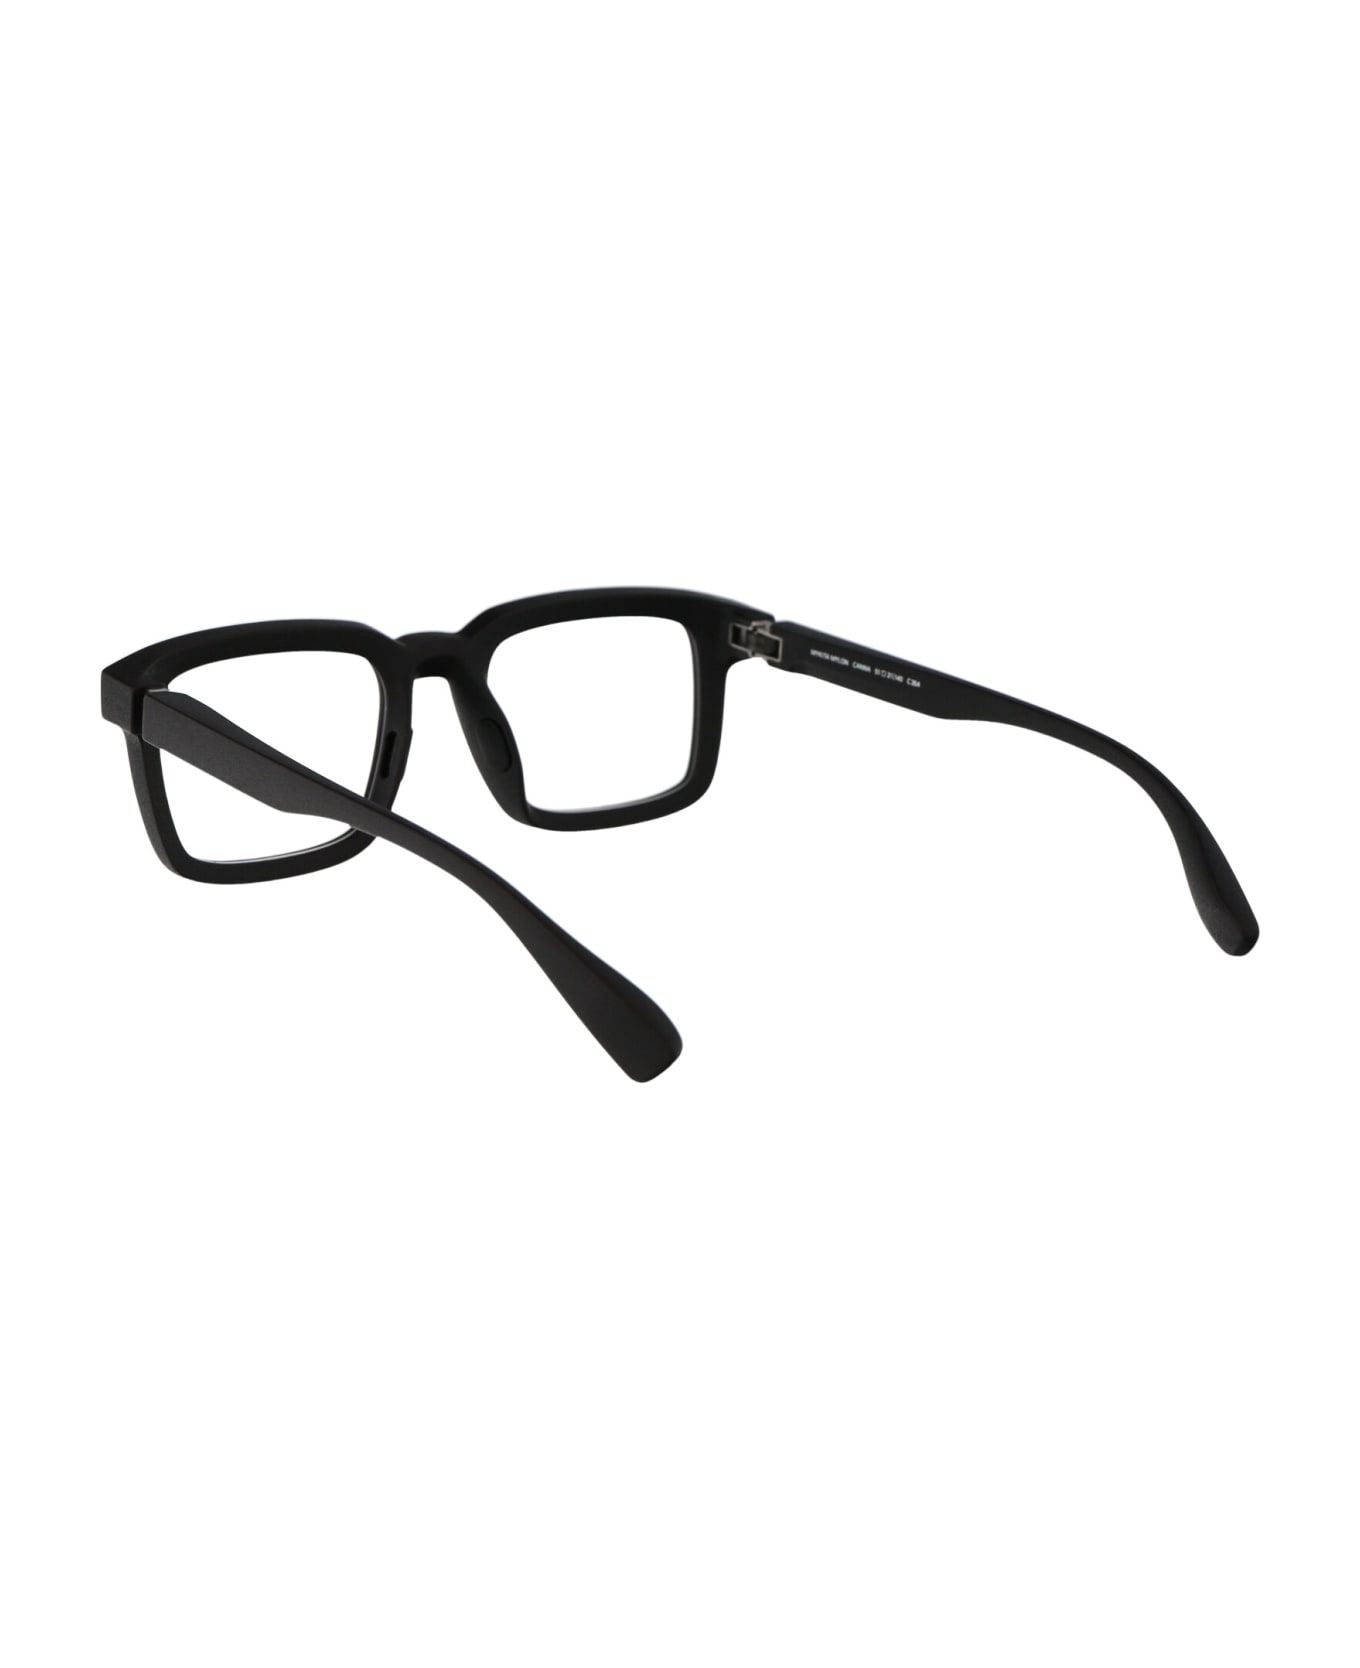 Mykita Canna Glasses - 354 MD1-Pitch Black Clear